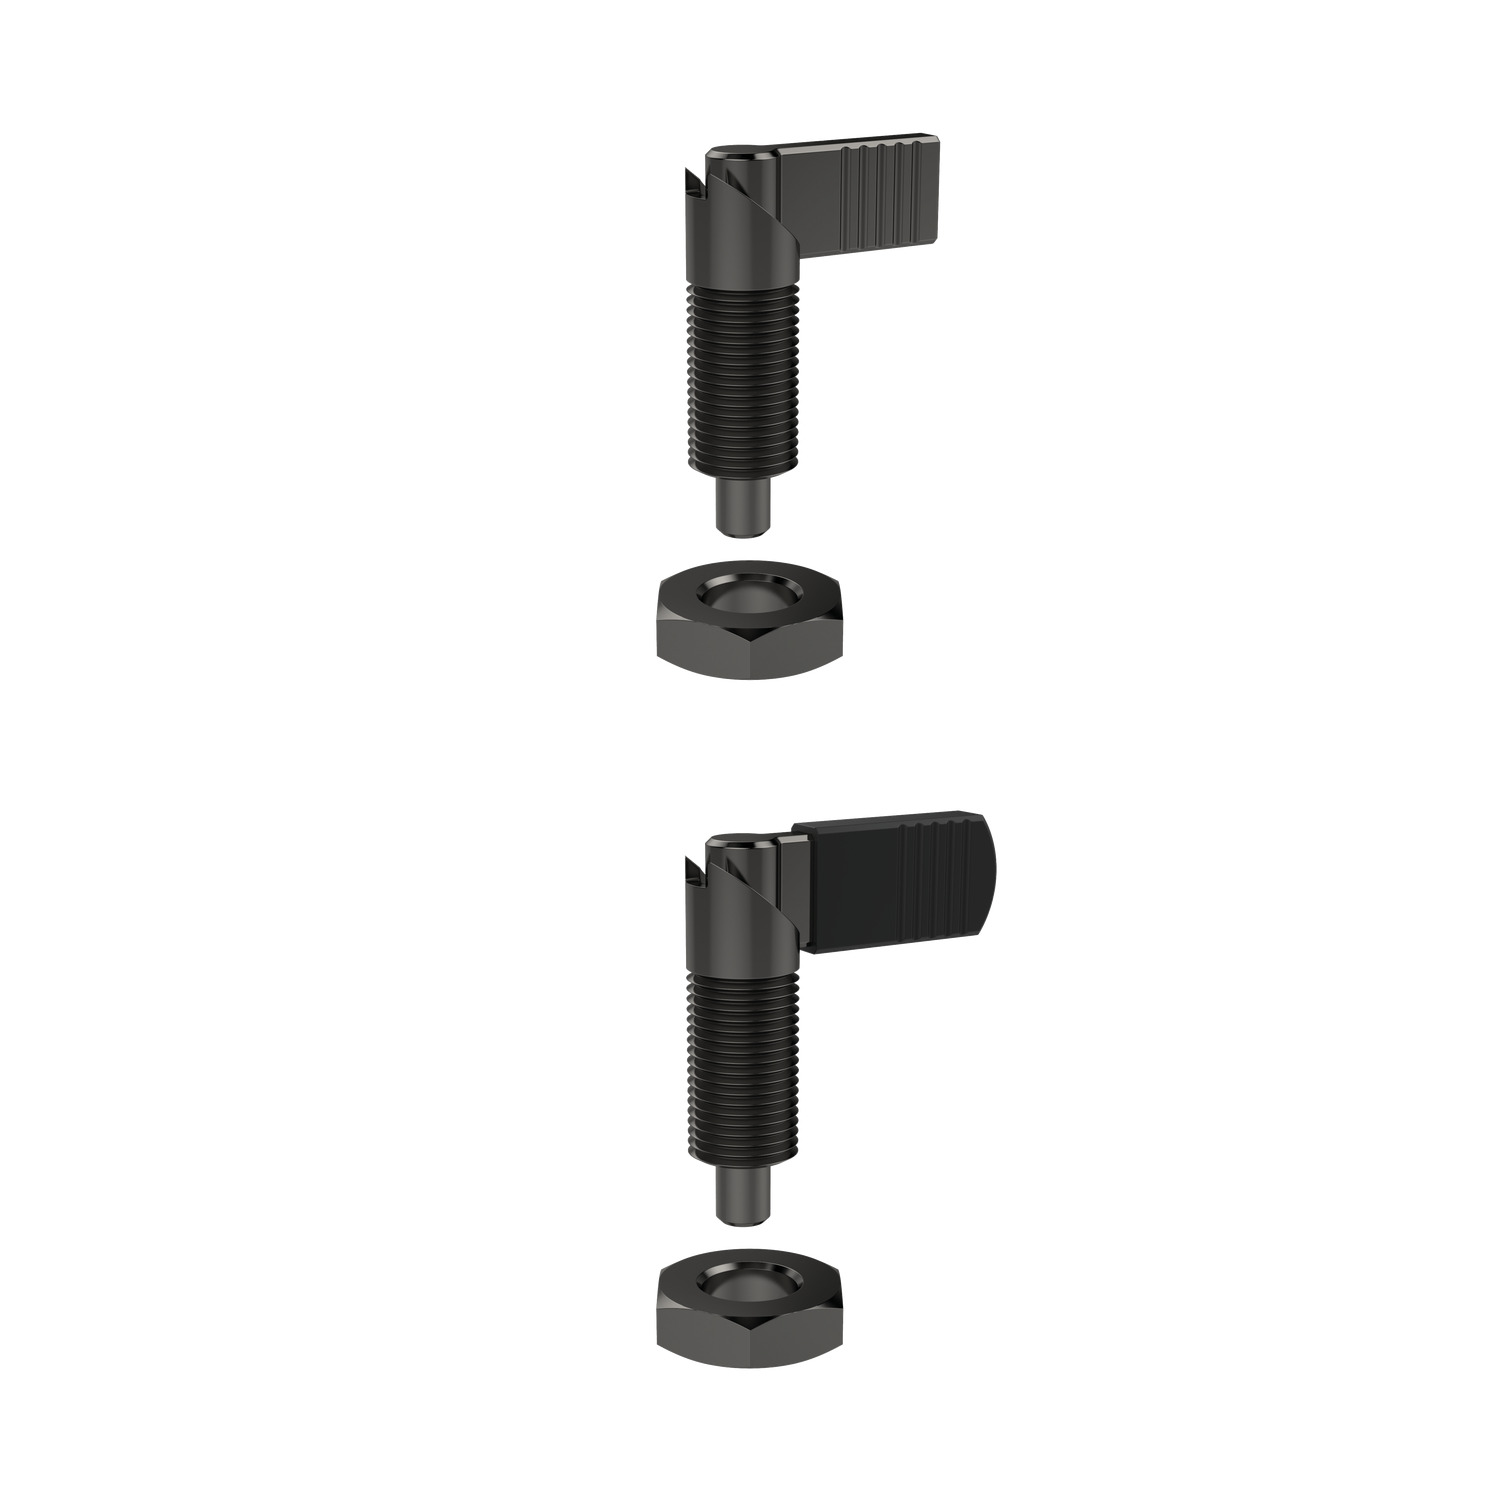 Index Plungers - Lever Grip Locking lever grip index plunger made from blackened steel. Actuate via 180° turn to retract pin and secure in notch to lock the pin whilst retracted.